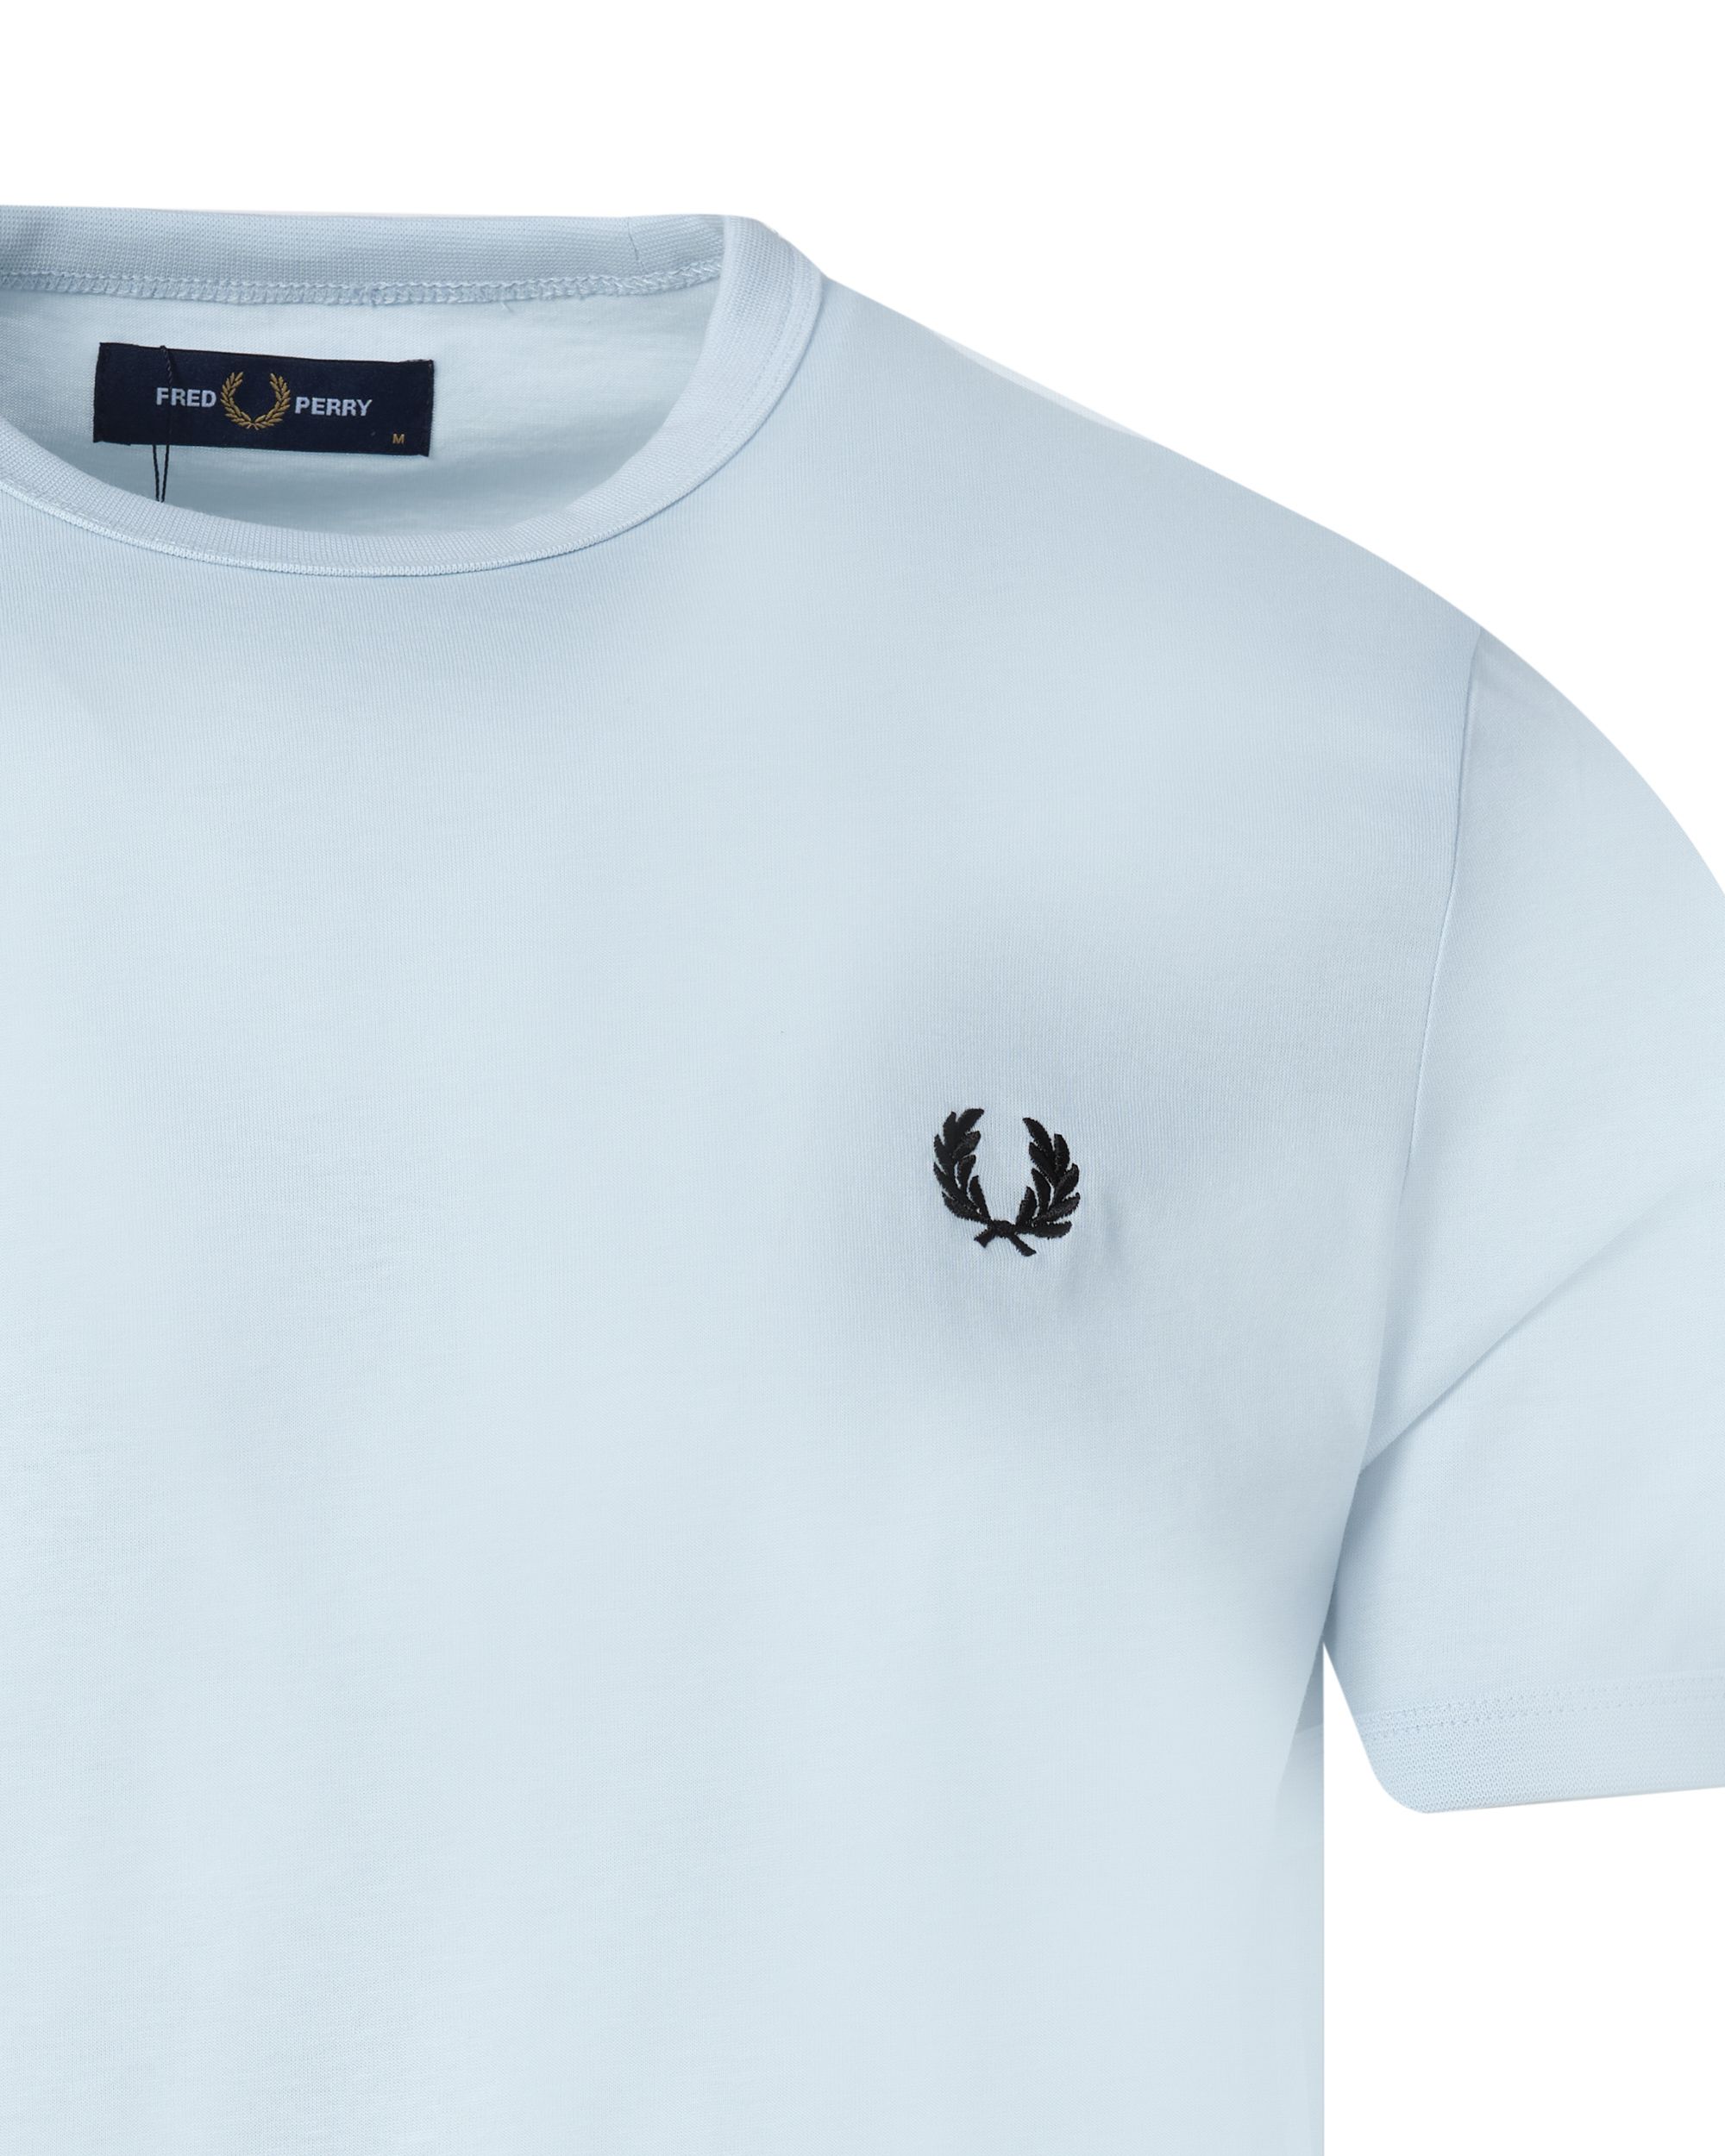 Fred Perry T-shirt KM Wit 083520-001-L